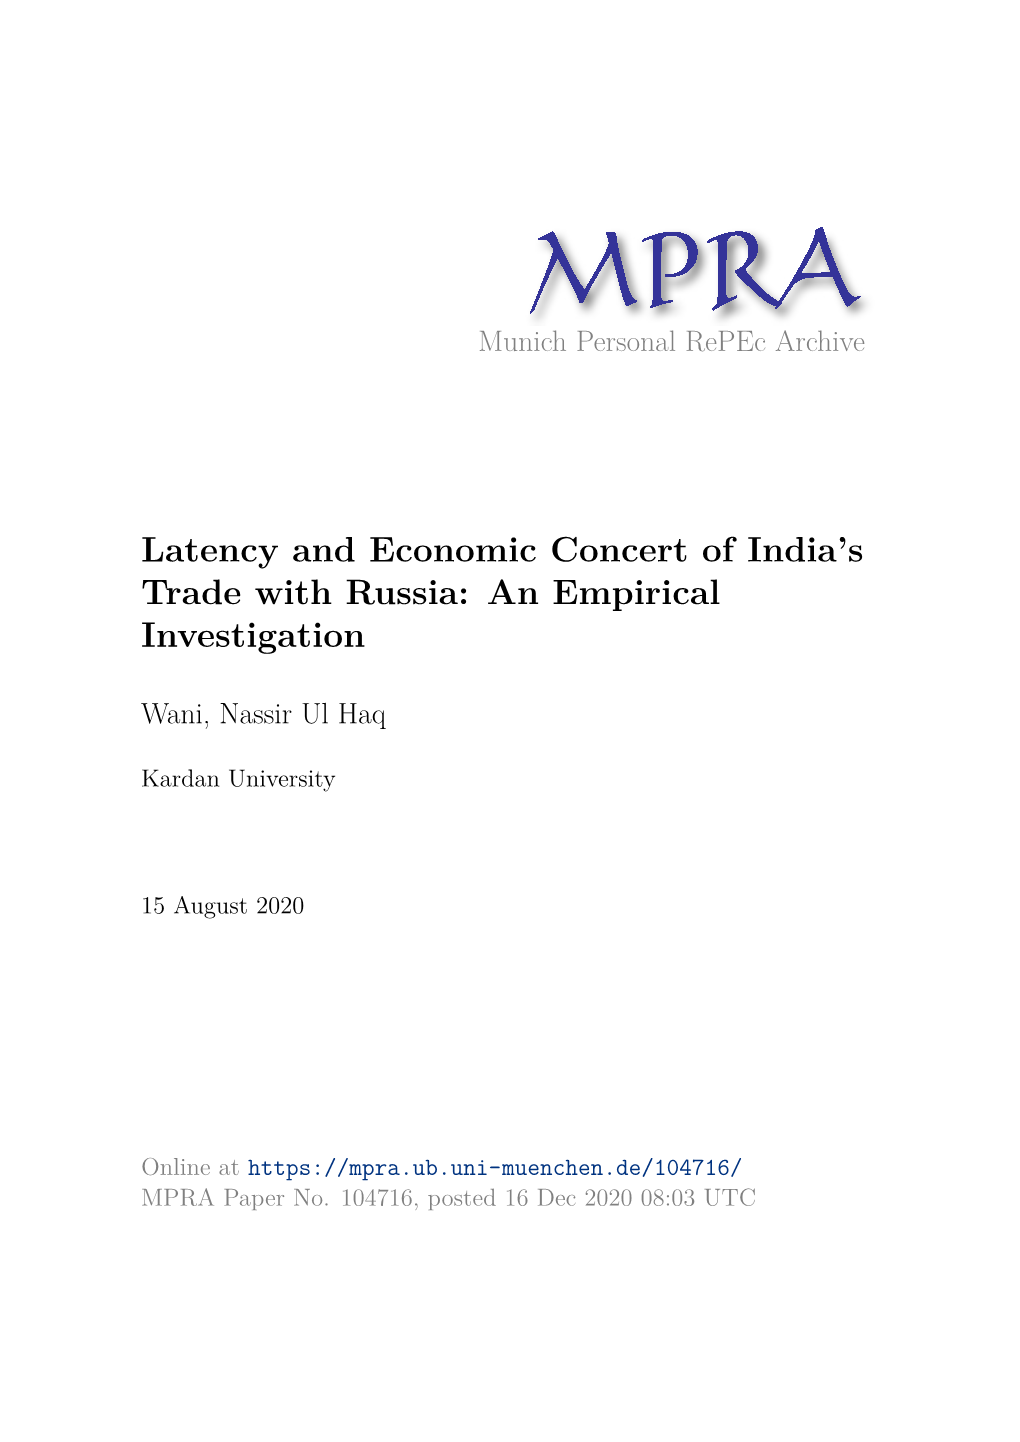 Latency and Economic Concert of India’S Trade with Russia: an Empirical Investigation